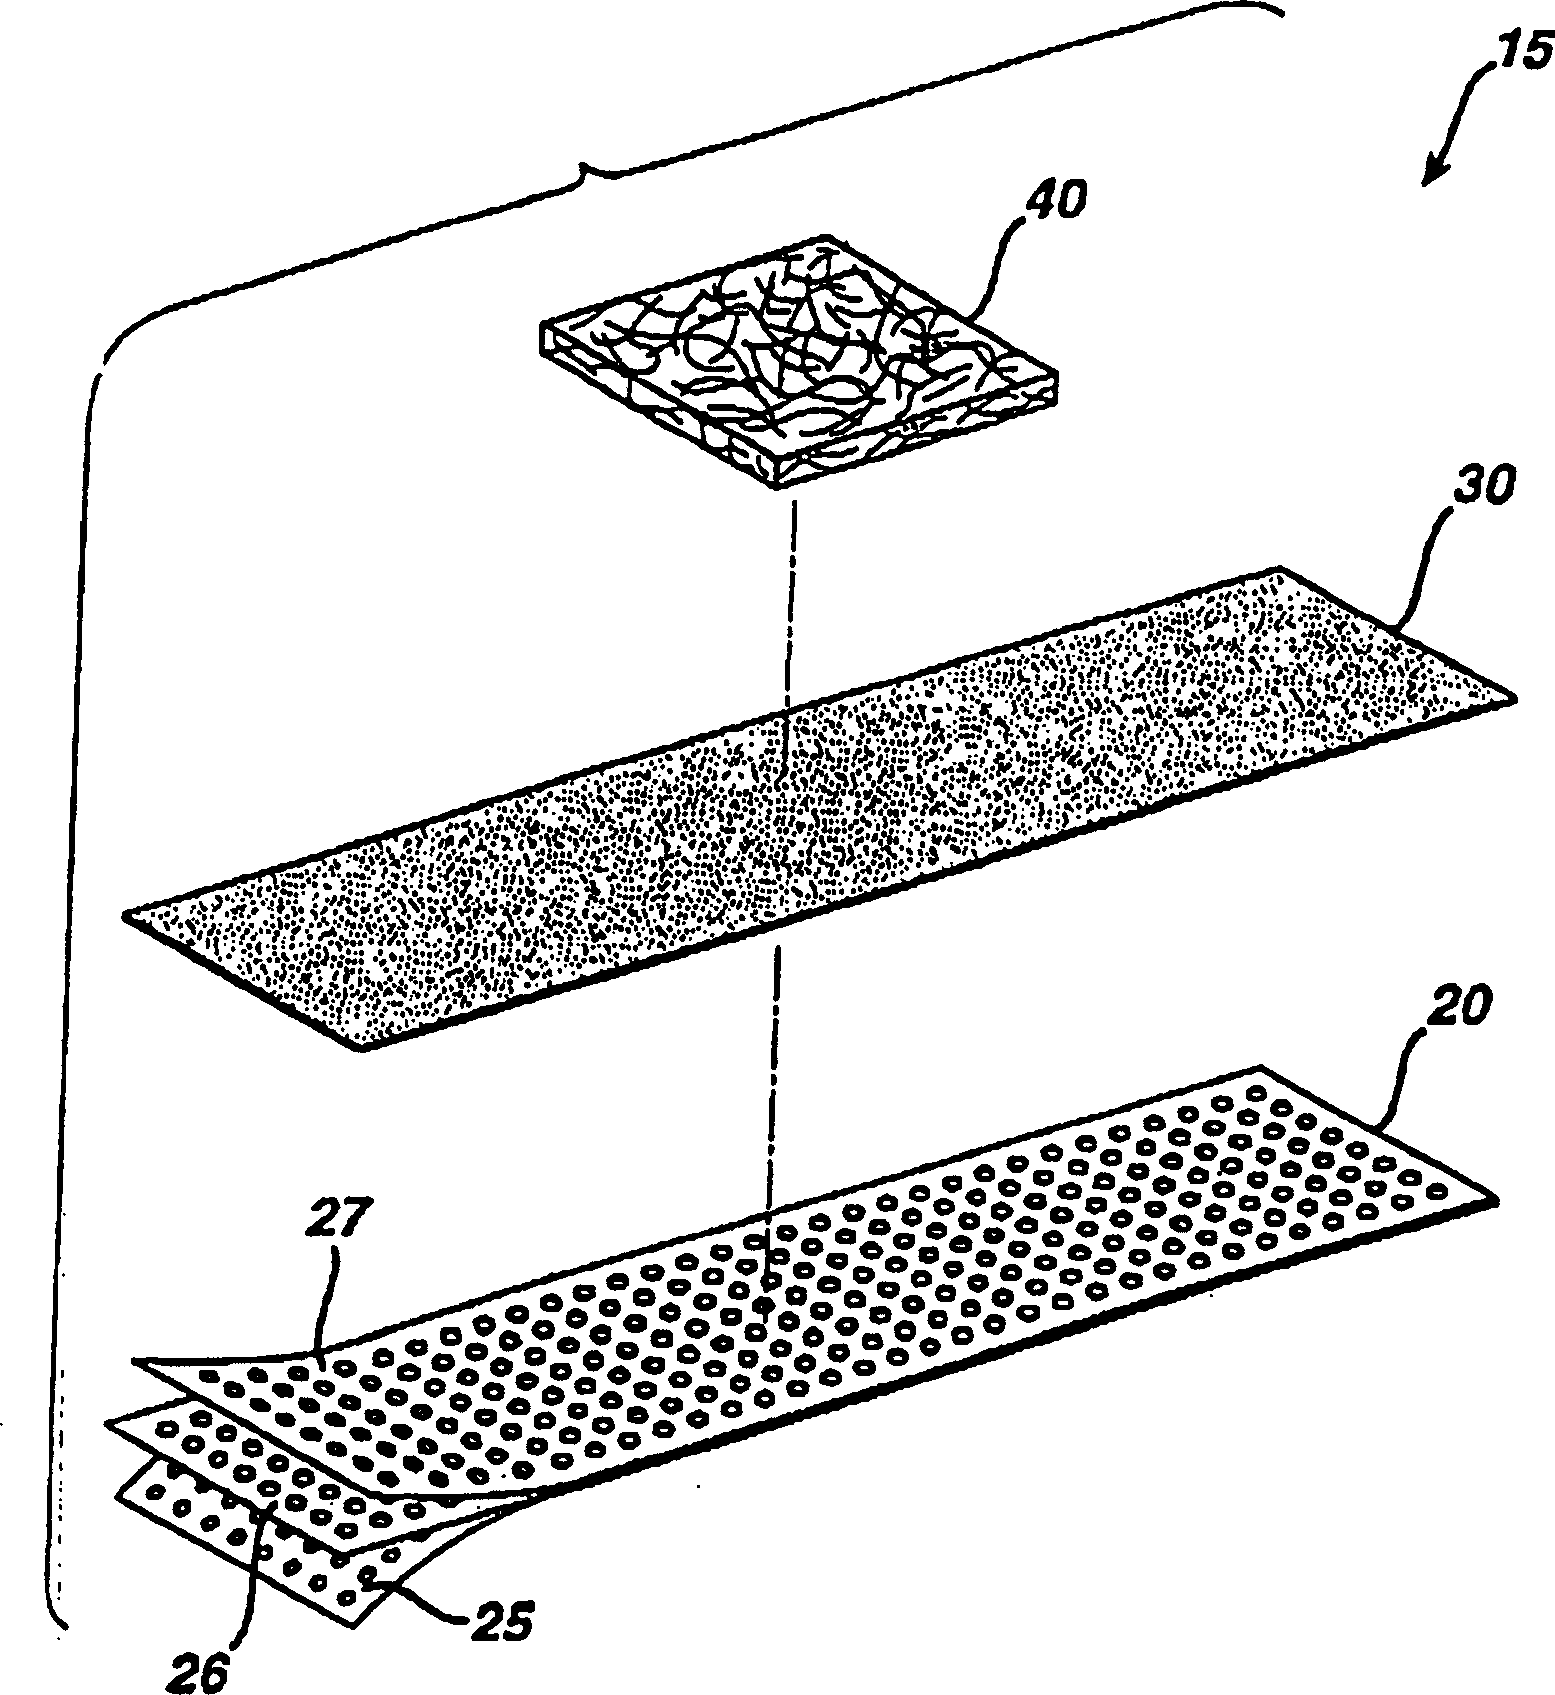 Adhesive bandage with improved back liner material